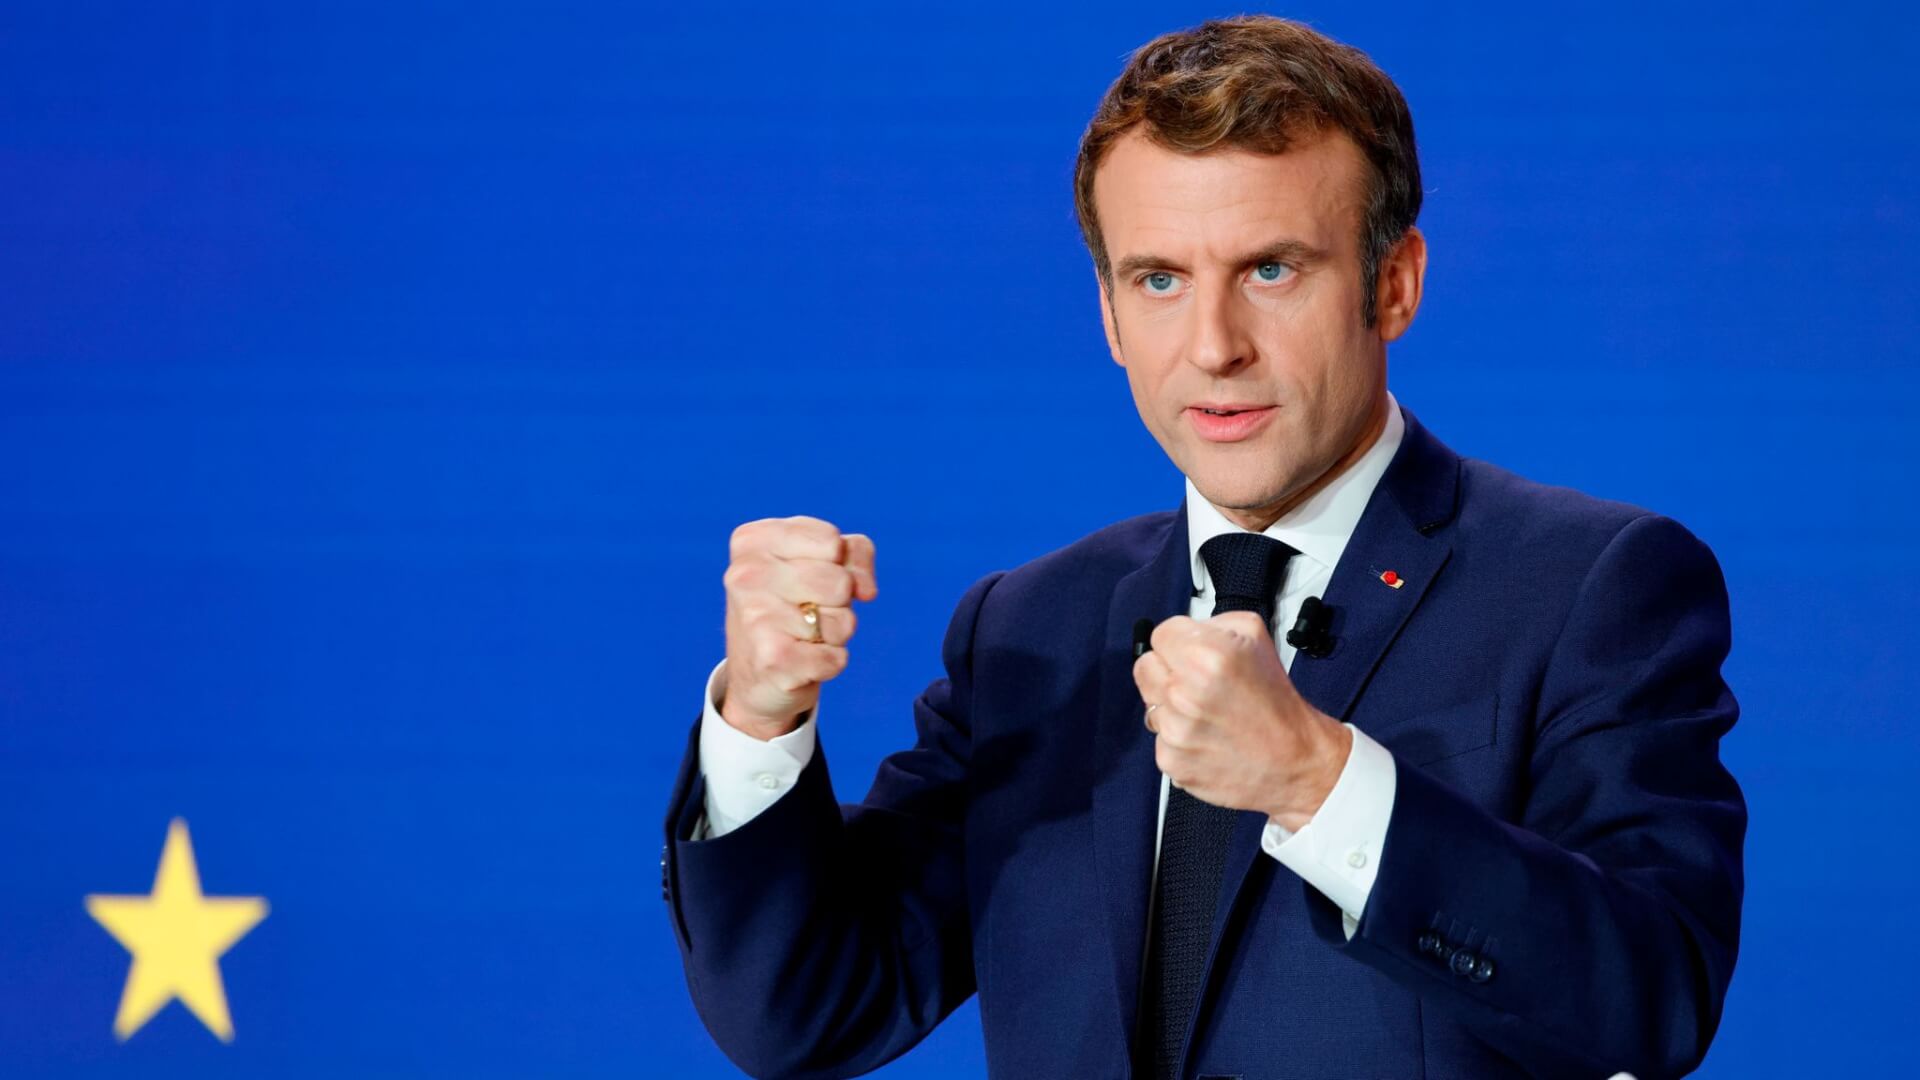 French President Macron Prioritises Relations With Africa During Paris’ EU Presidency